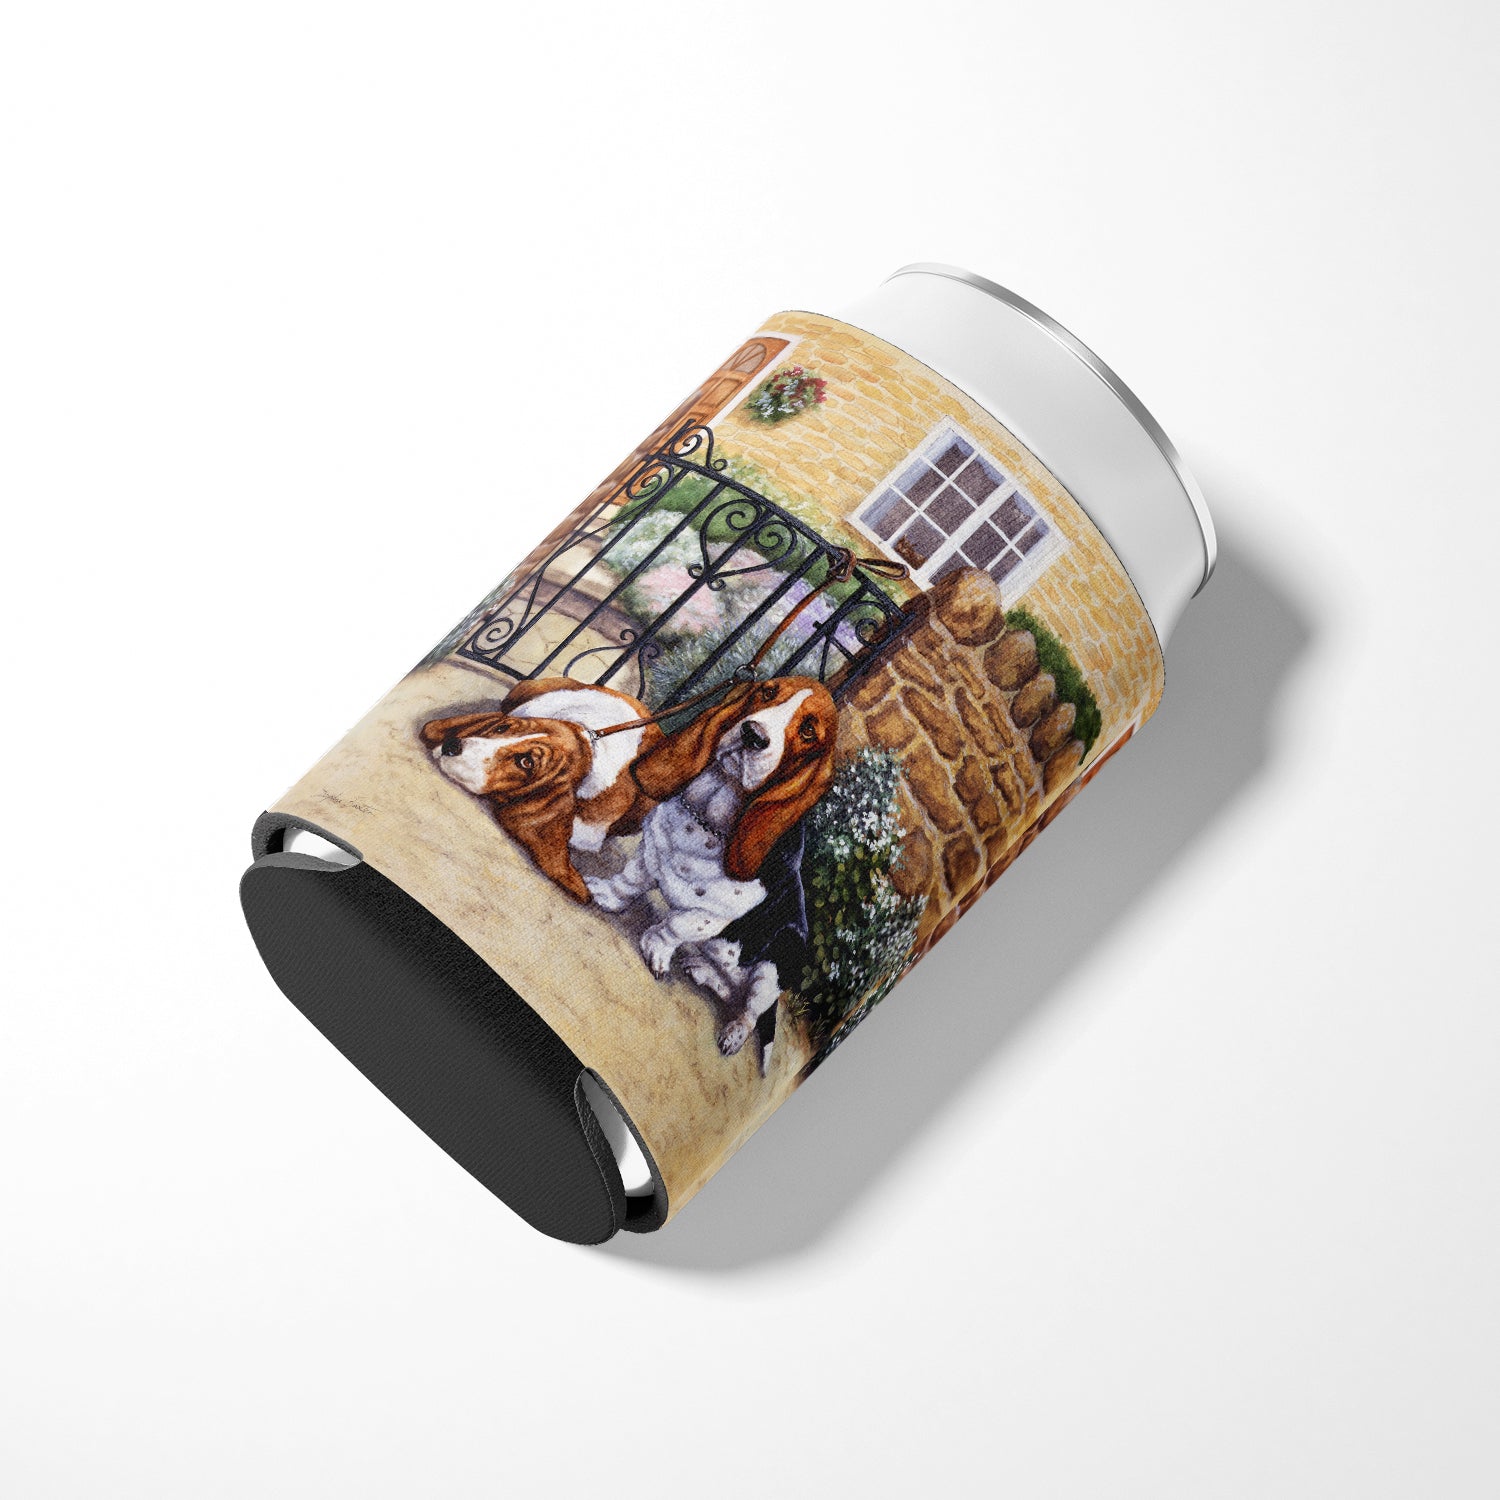 Basset Hound at the gate Can or Bottle Hugger BDBA0312CC